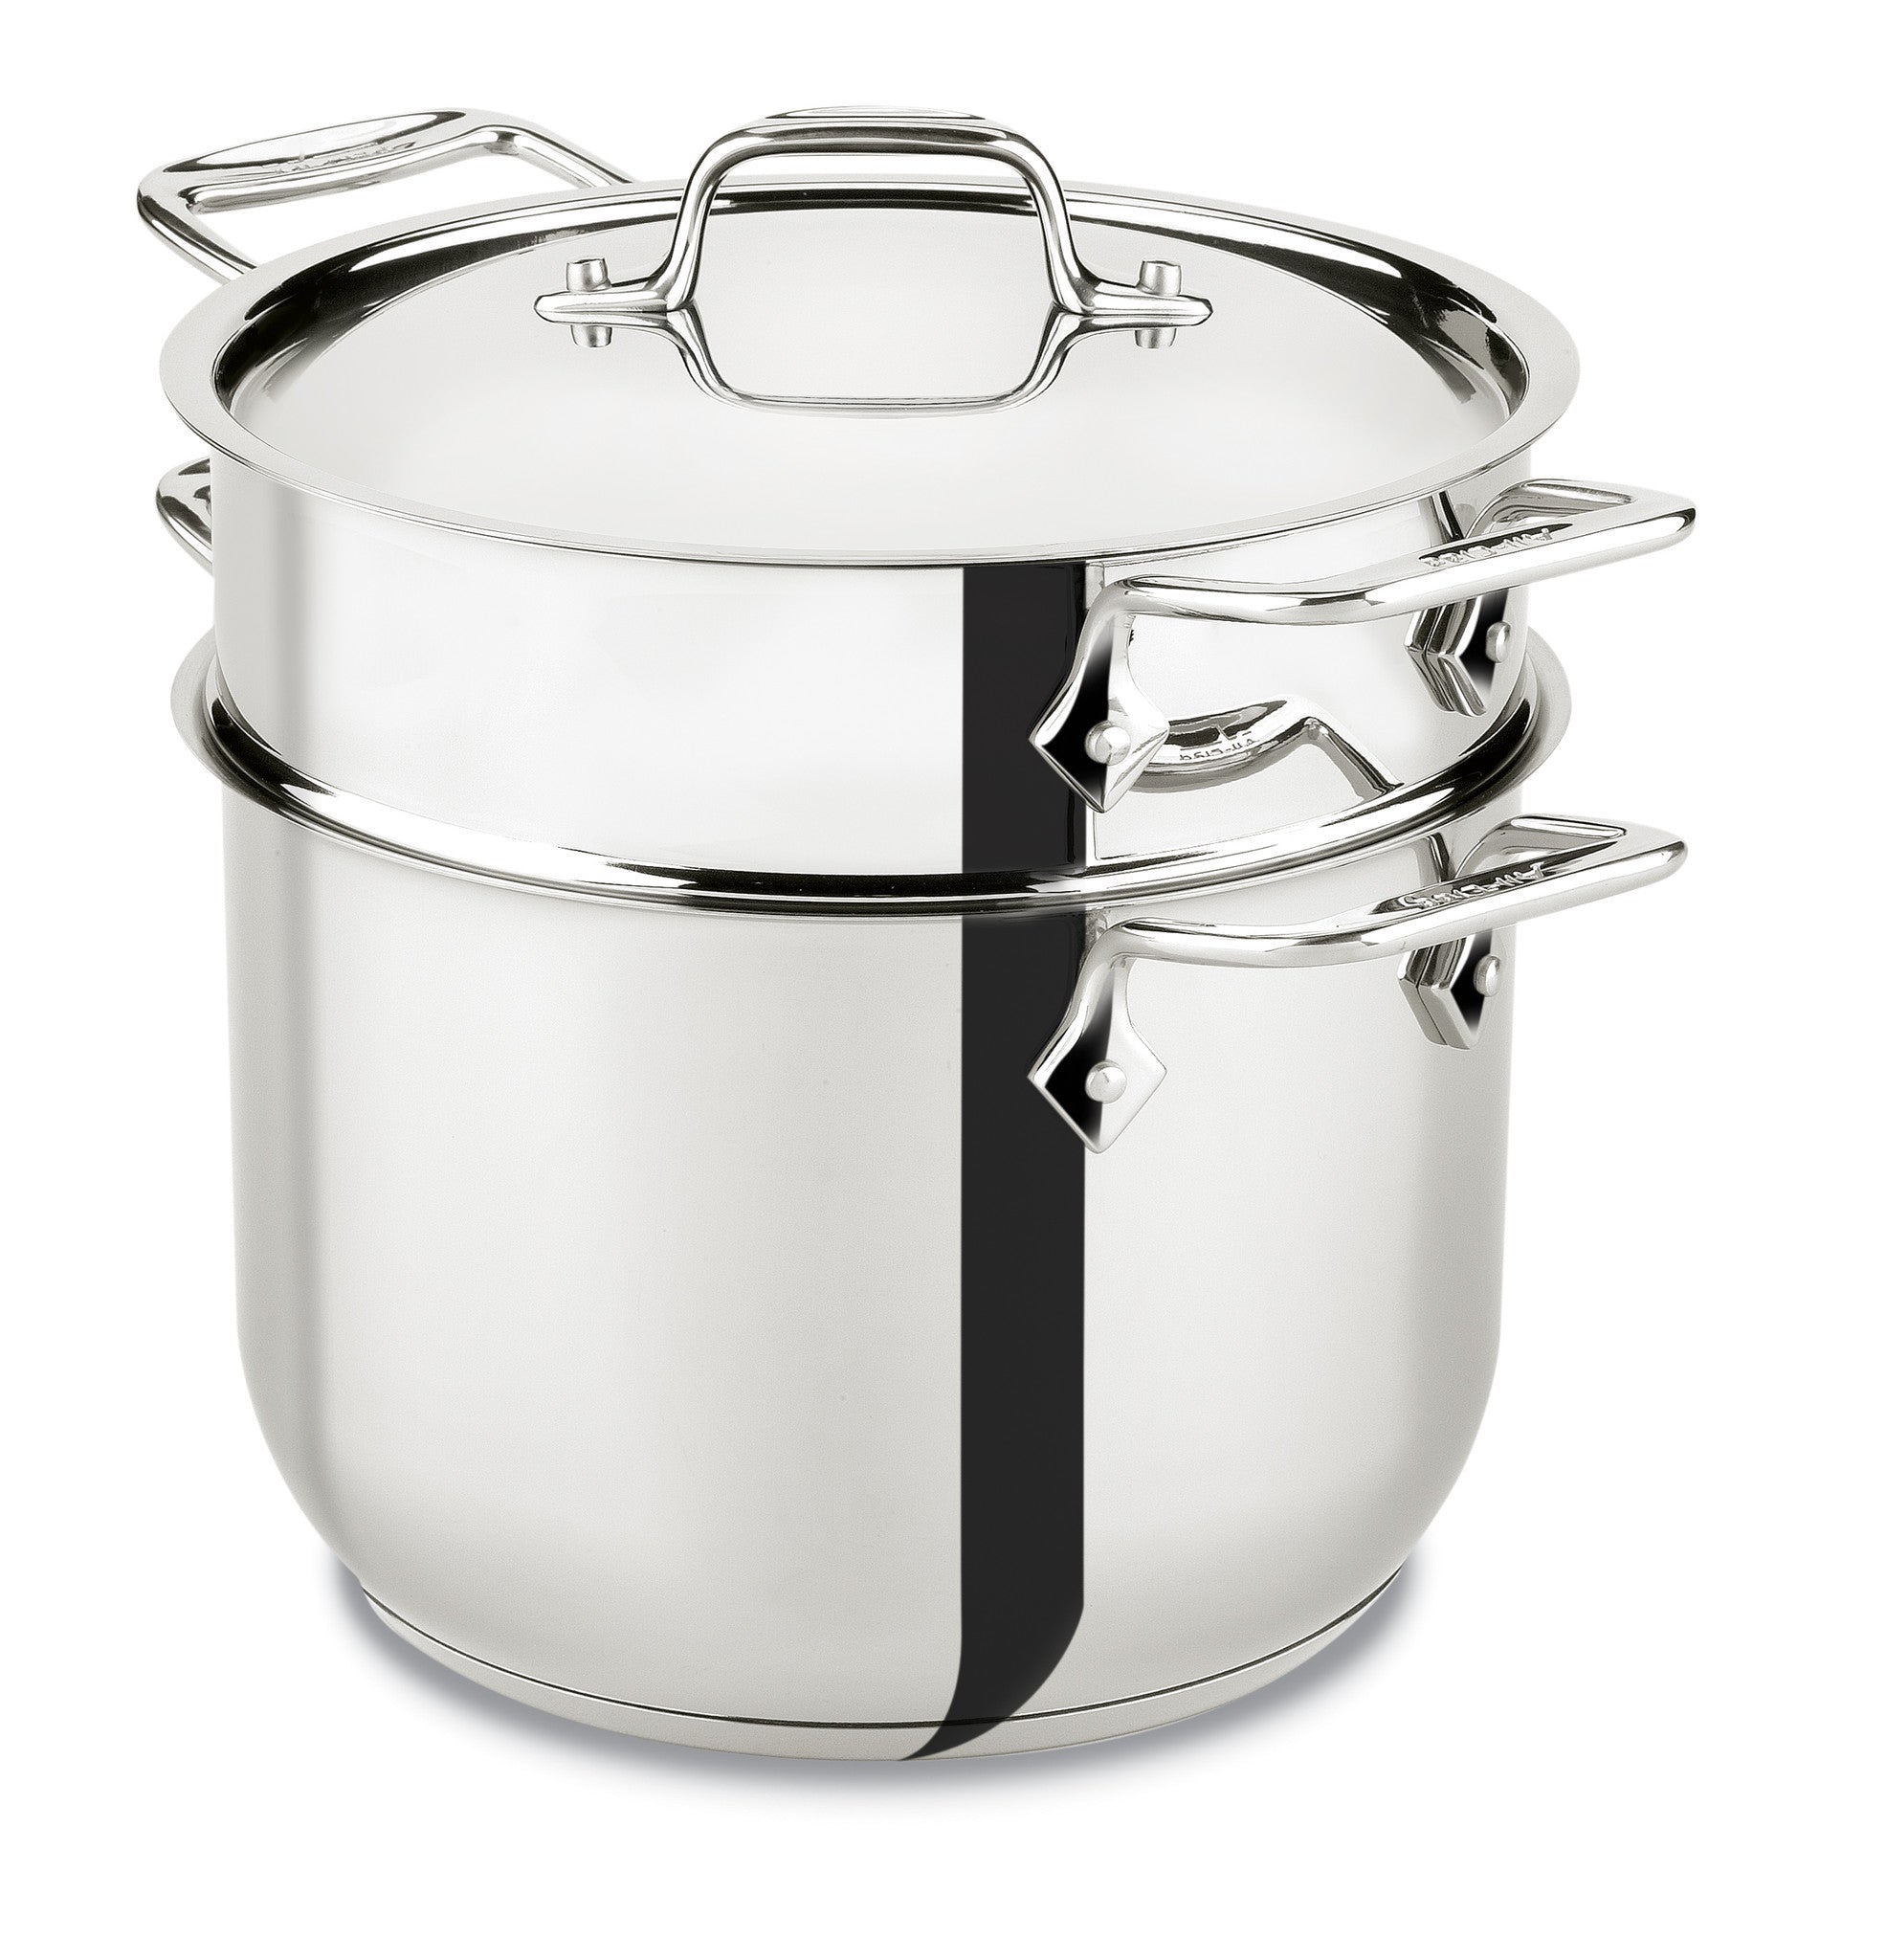 All-Clad D3™ Compact Stainless Steel Stock Pot with Lid & Reviews